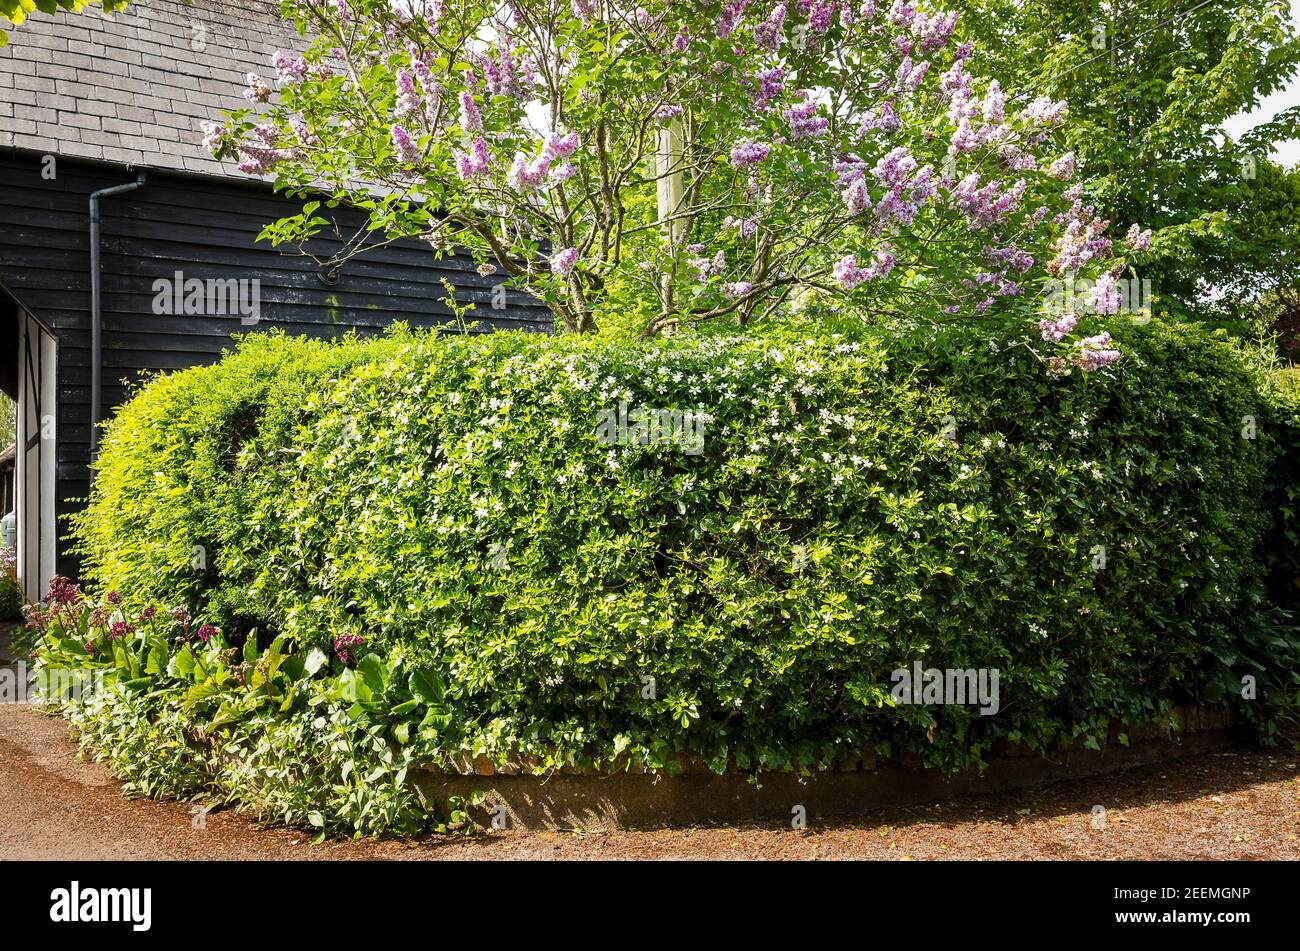 A mixed hedge with fragrant shrubs and a Lilac tree (Syringa vulgaris Kaatherine Havemeyer flowering in May in an English garden in a rural village Stock Photo